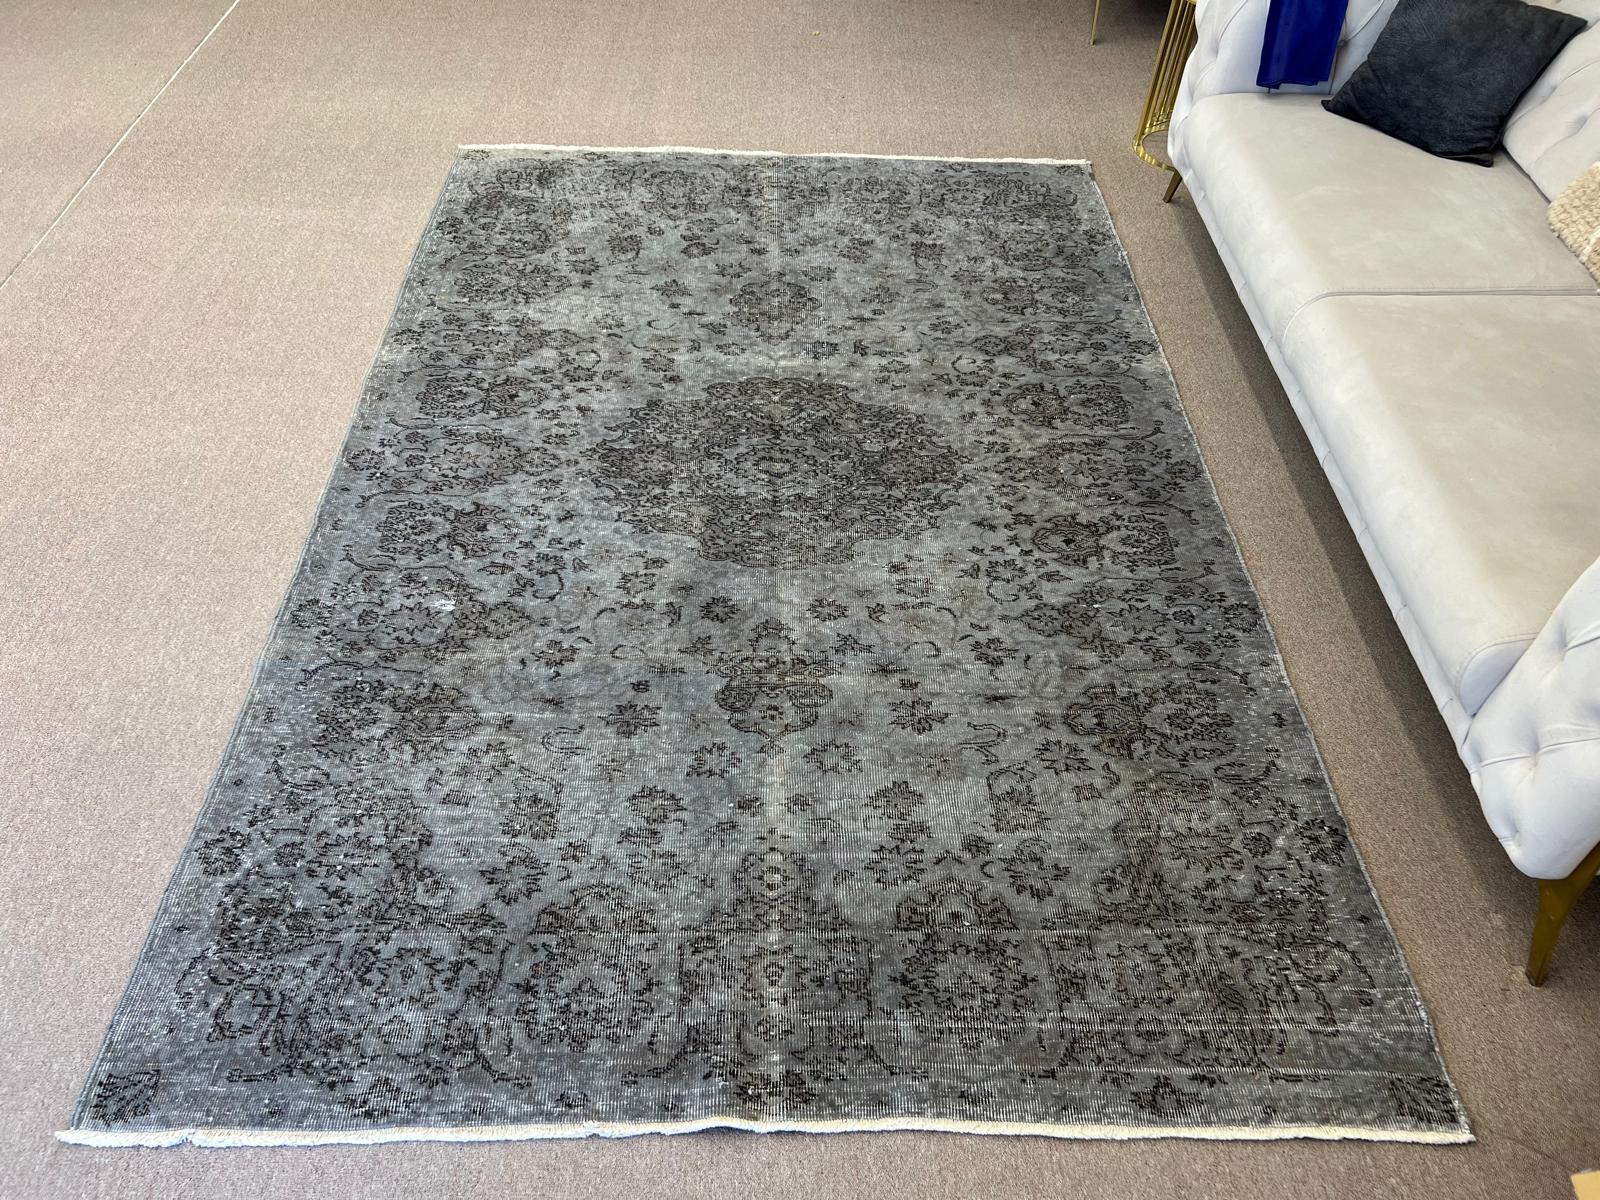 A vintage Turkish area rug hand-knotted in the 1960s with low wool pile on cotton foundation with a medallion design. The rug was over-dyed in charcoal gray. It is in good condition, professionally washed, sturdy and suitable for areas with high